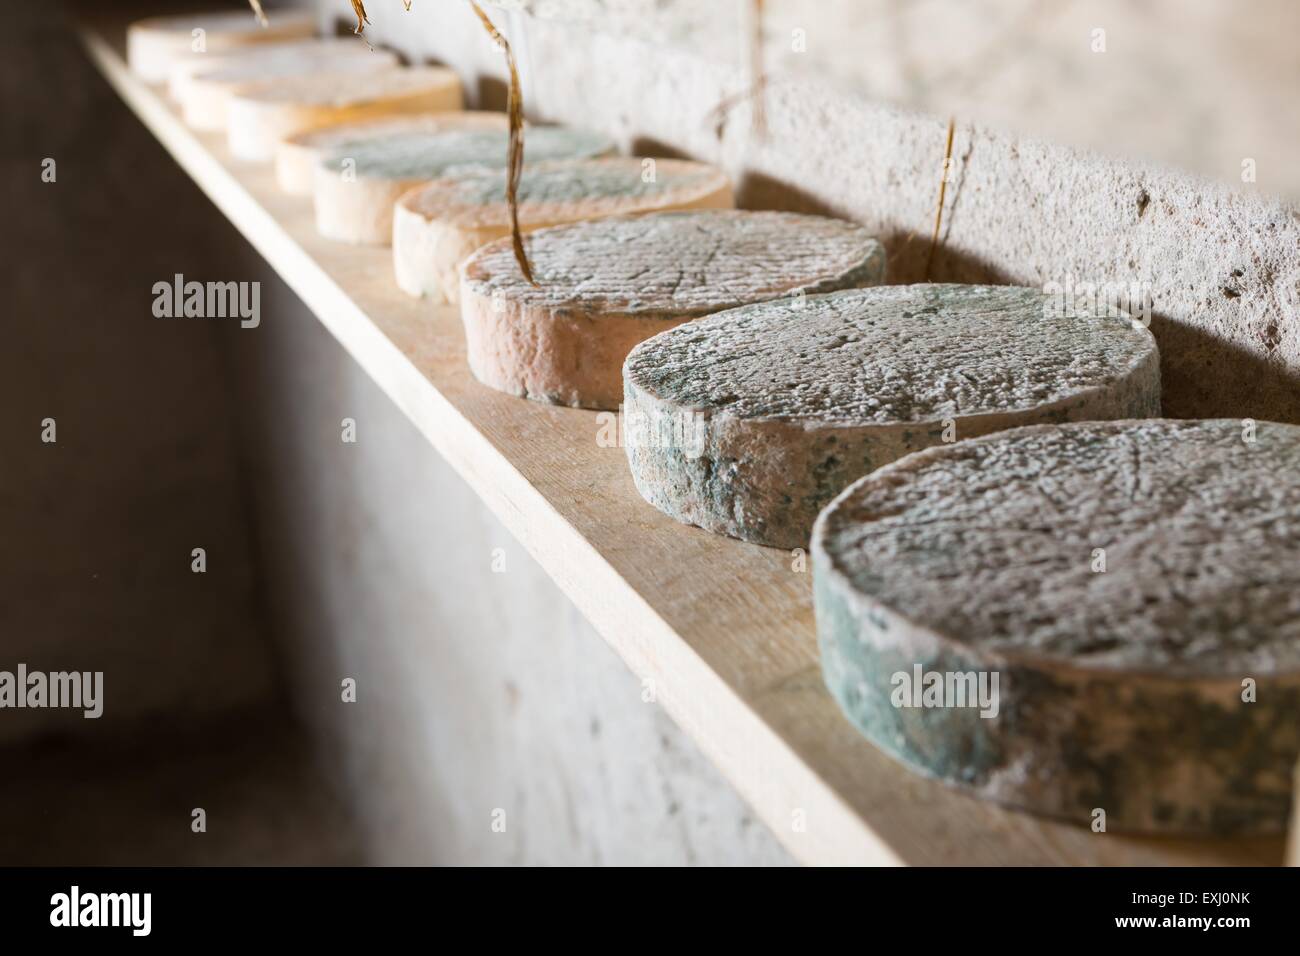 Goat cheese maturing in basement. Studio shoot with mystic light efect. Stock Photo